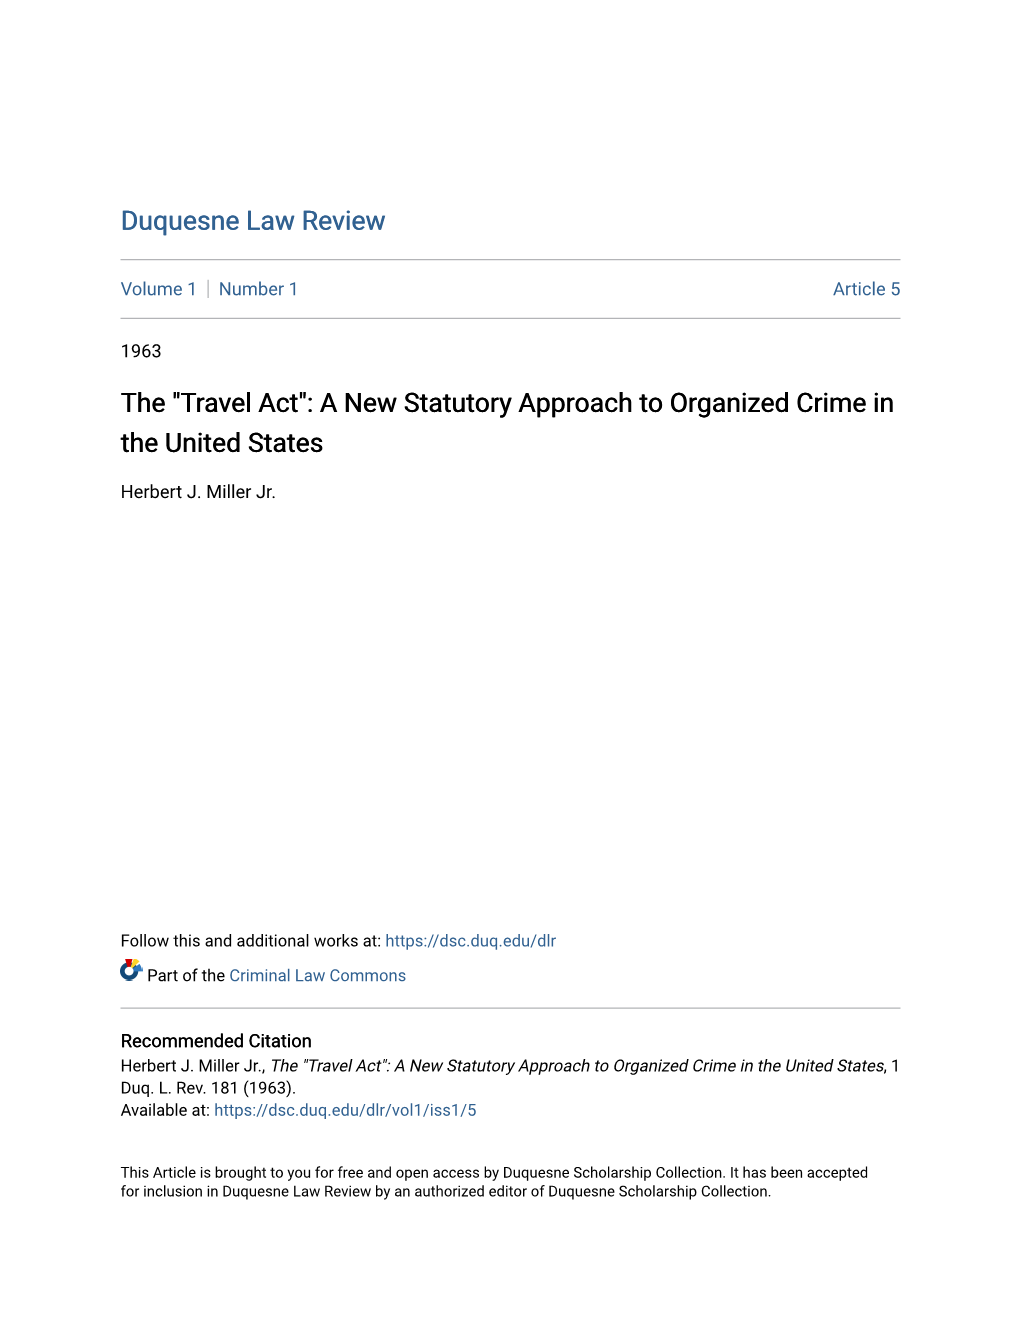 The "Travel Act": a New Statutory Approach to Organized Crime in the United States